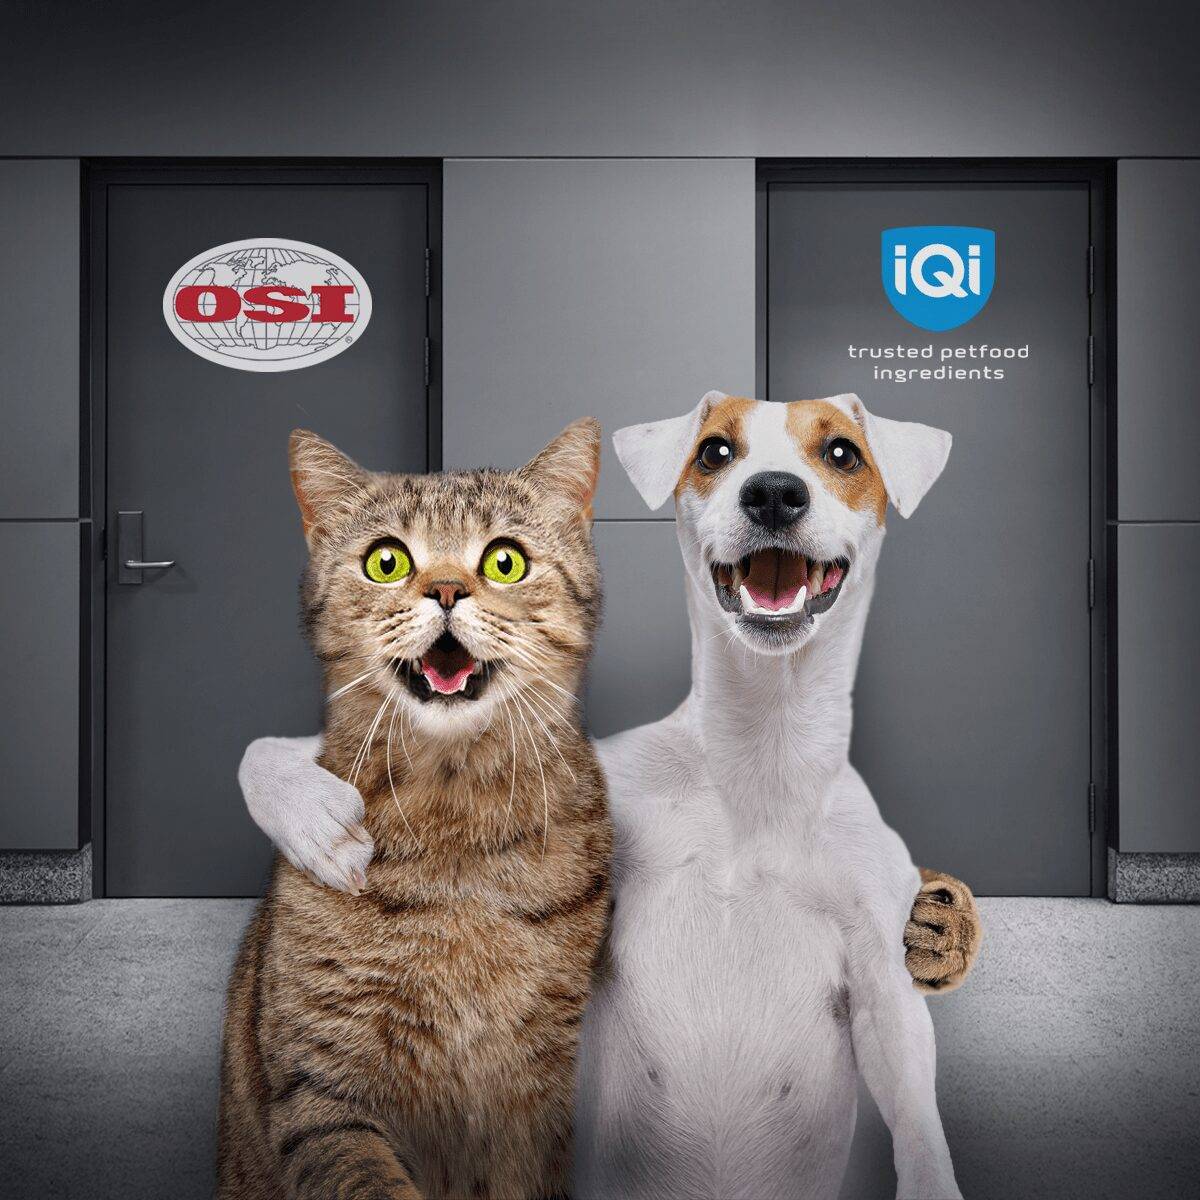 Cat and dog together in front of an OSI & IQI branded door.